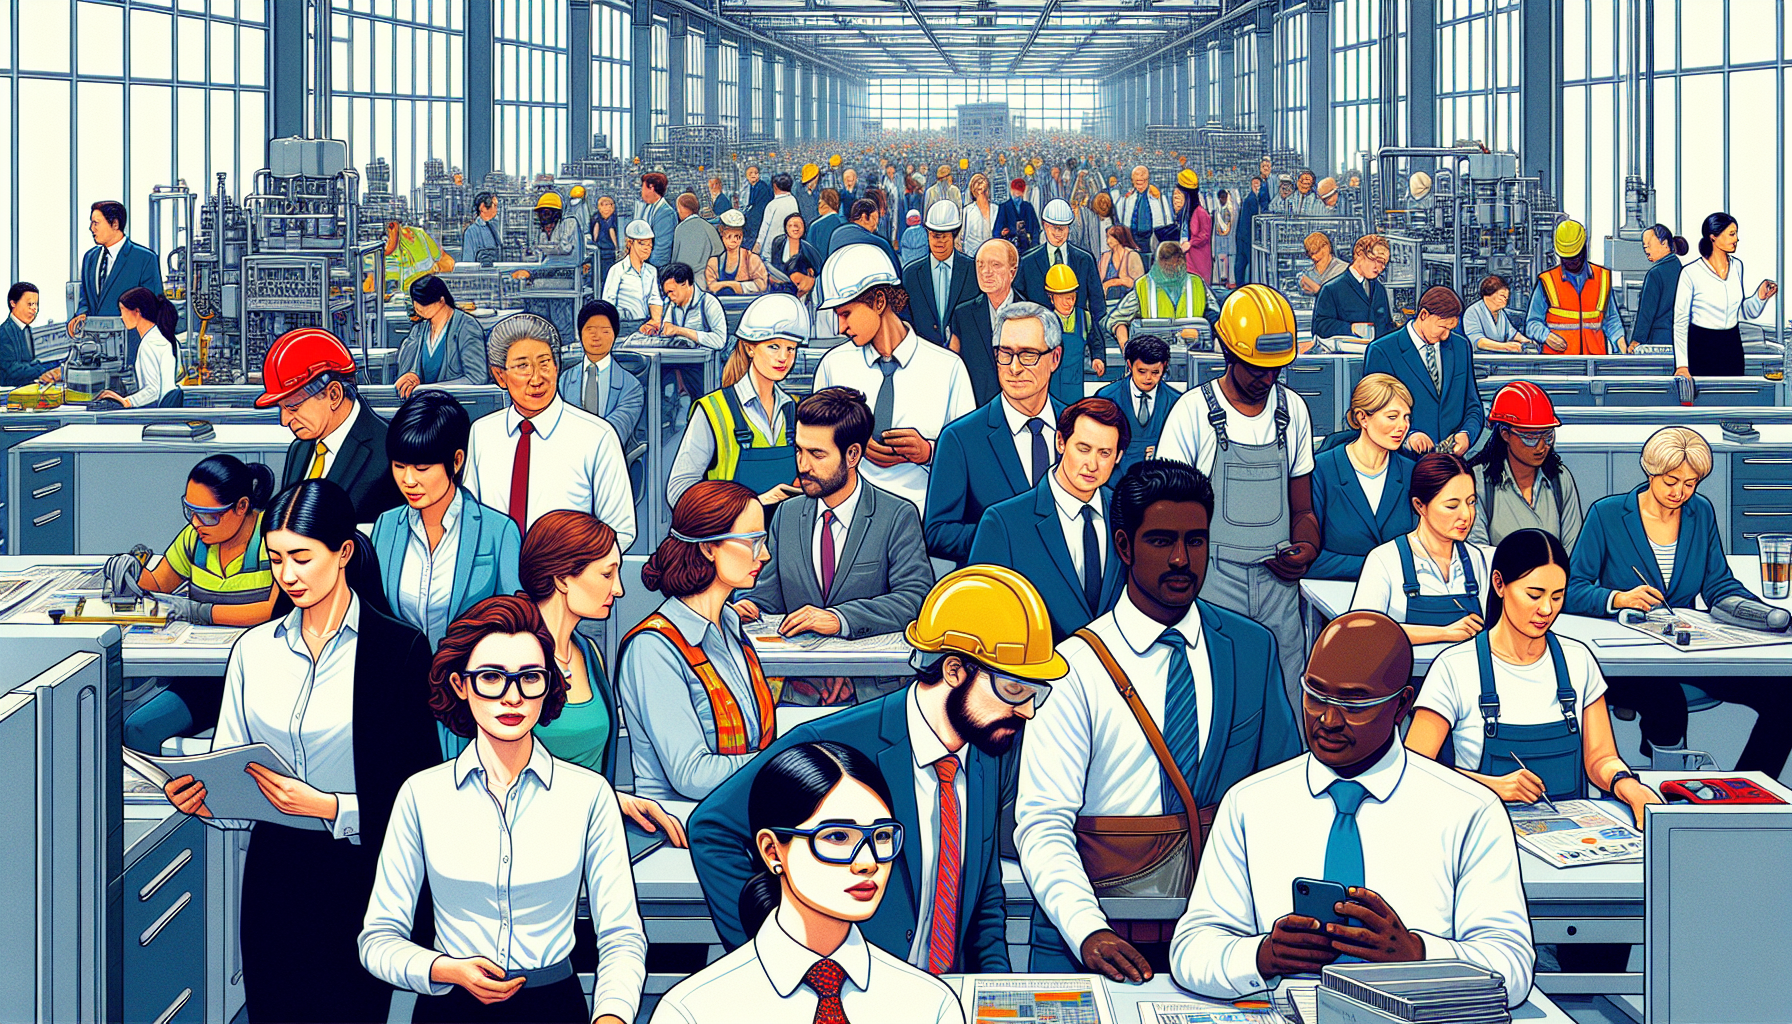 Illustration of diverse employees following workplace policies and procedures